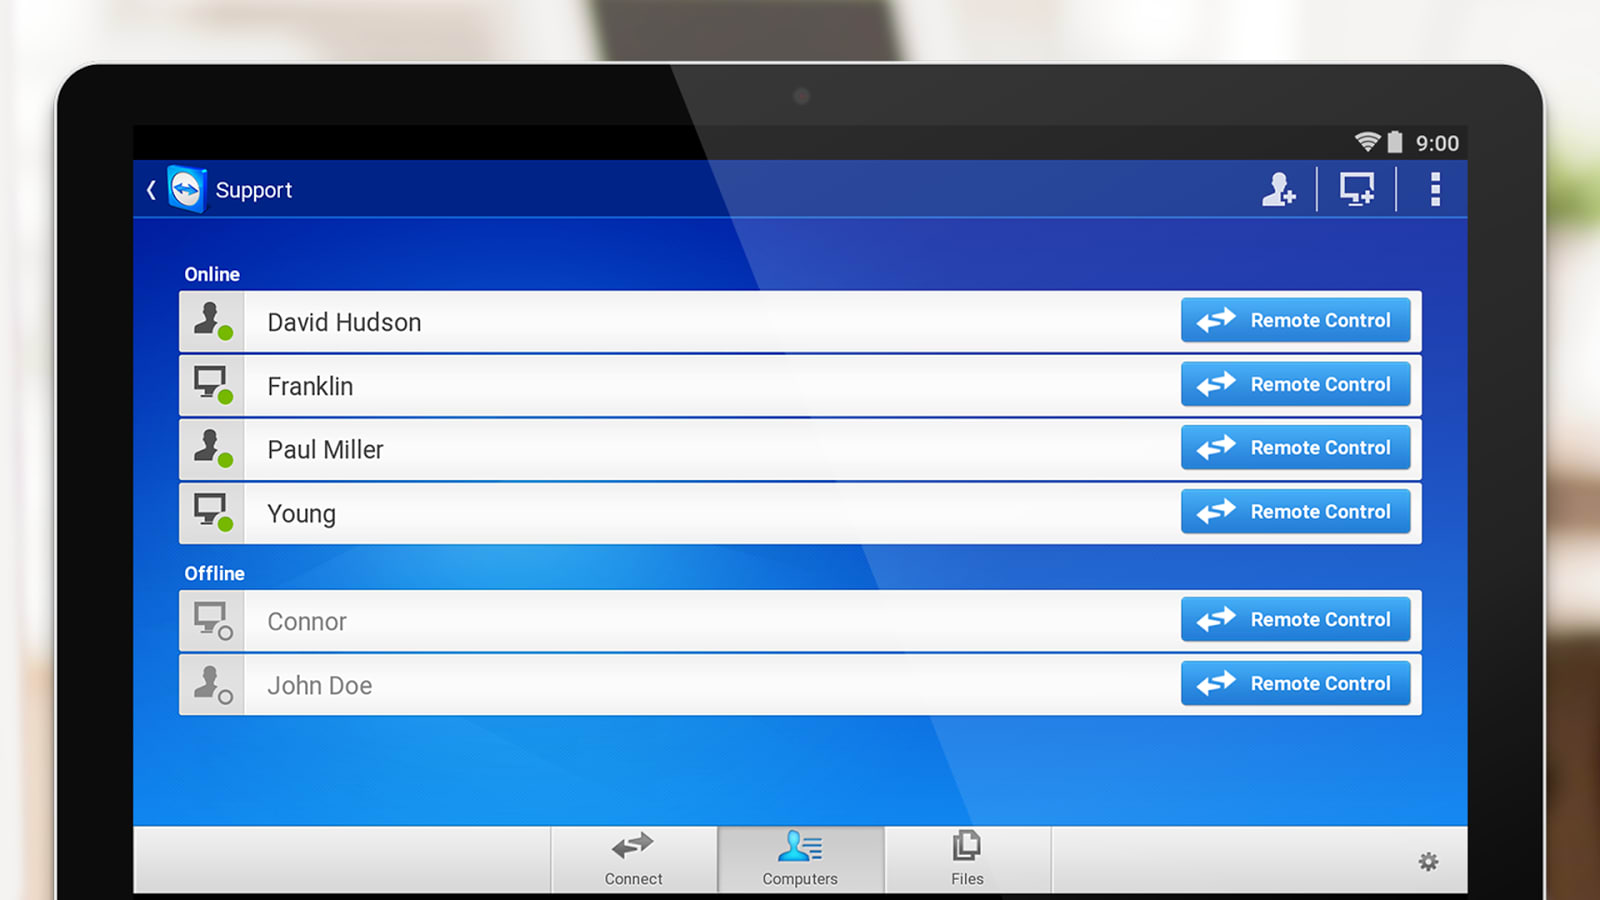 teamviewer download for android